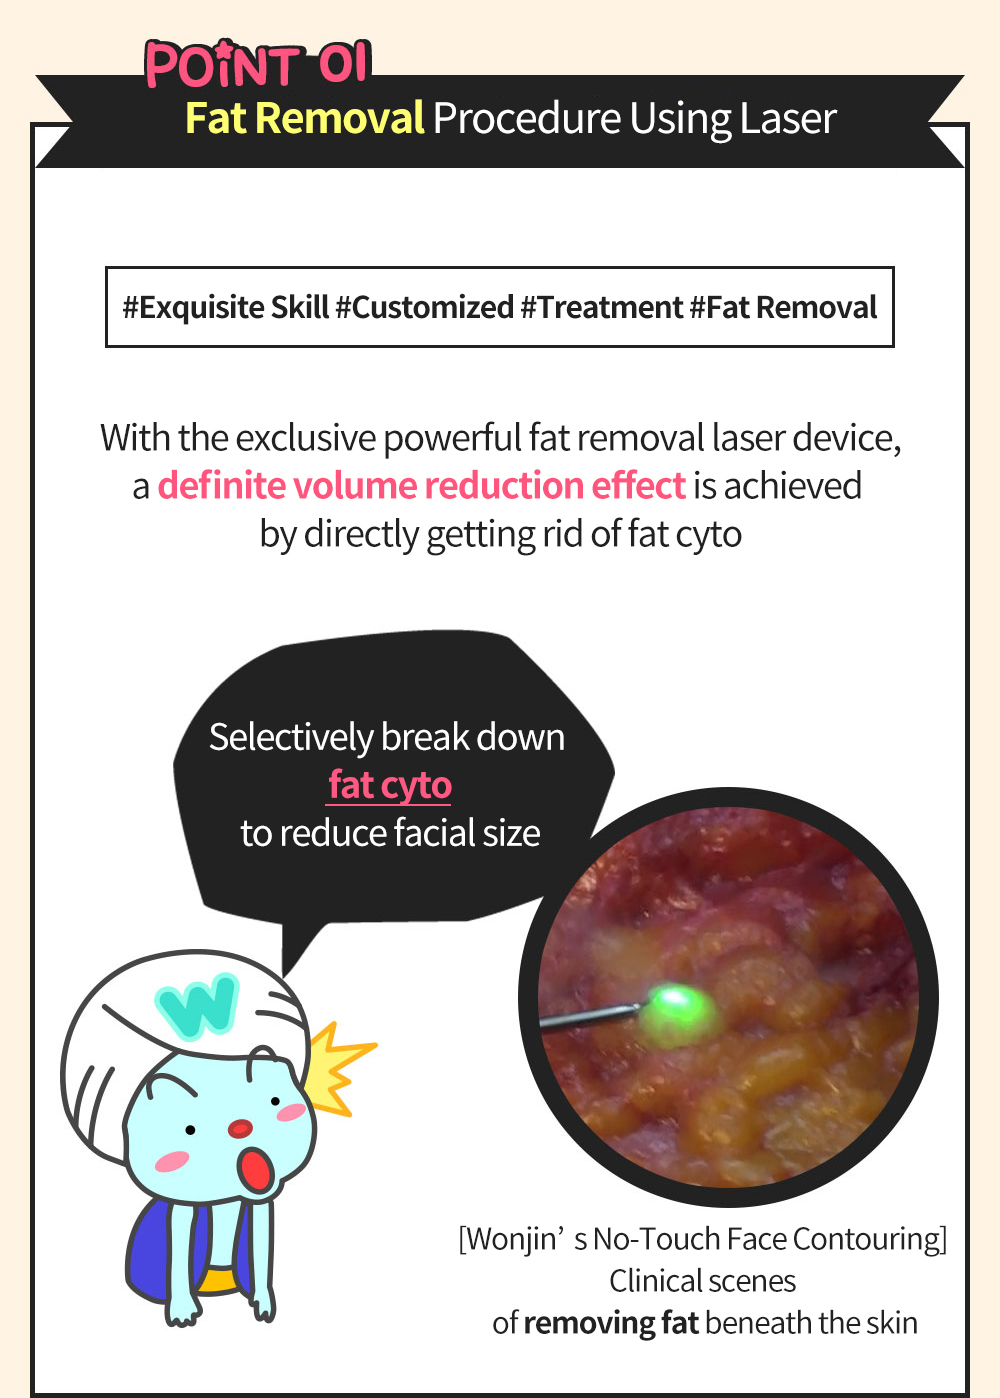 POINT 01 Fat Removal Procedure Using Laser ,#Exquisite Skill #Customized #Treatment #Fat Removal , With the exclusive powerful fat removal laser device,a definite volume reduction effect is achieved by directly getting rid of fat cytos , Selectively break down fat cytos to reduce facial size , [Wonjin’s No-Touch Face Contouring] Clinical scenes of removing fat beneath the skin